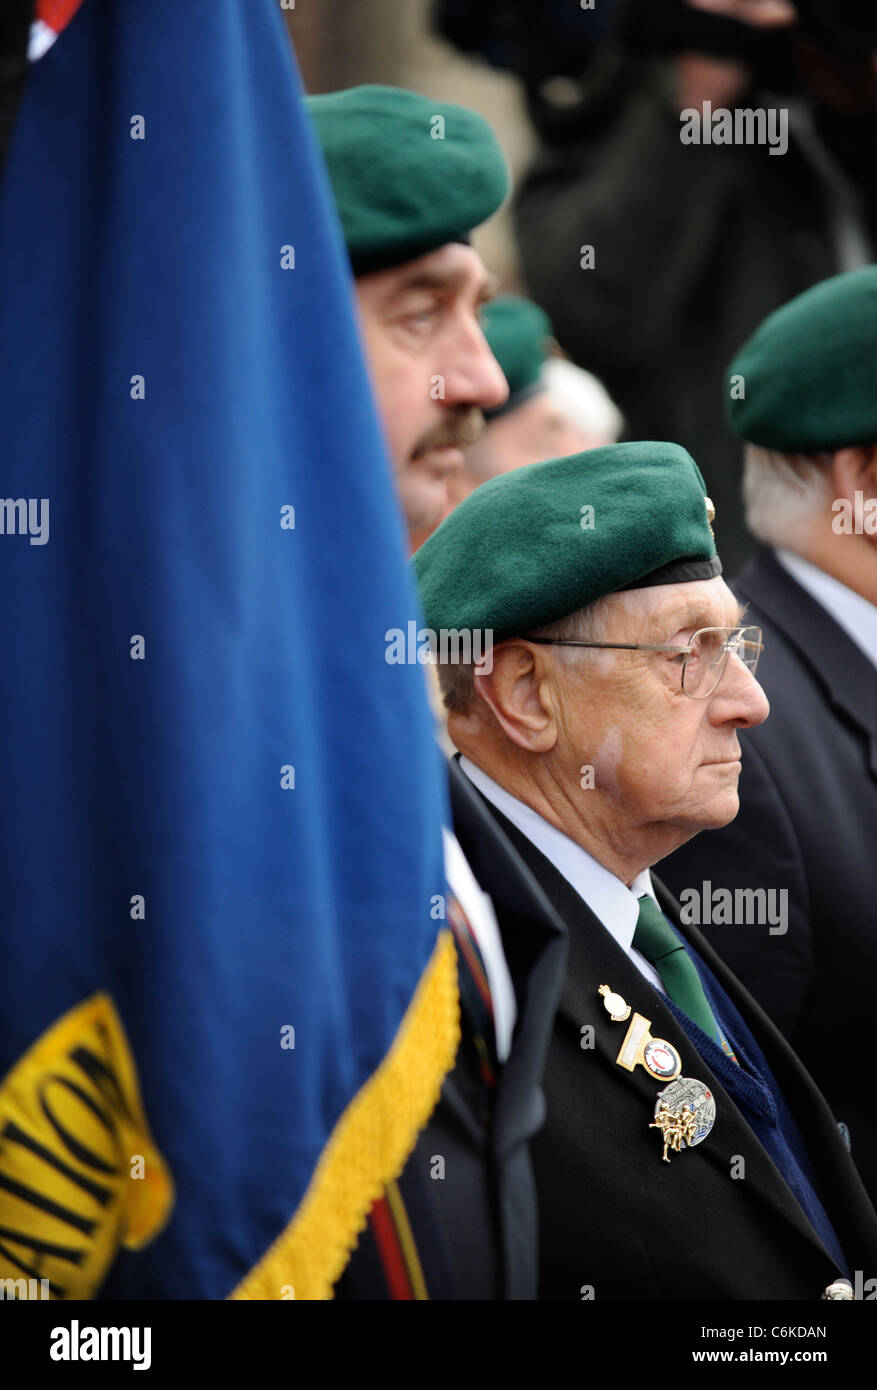 Army veterans in uniform amongst mourners gathered for a repatriation ceremony at Wootton Bassett, Wiltshire UK Dec 2008 Stock Photo